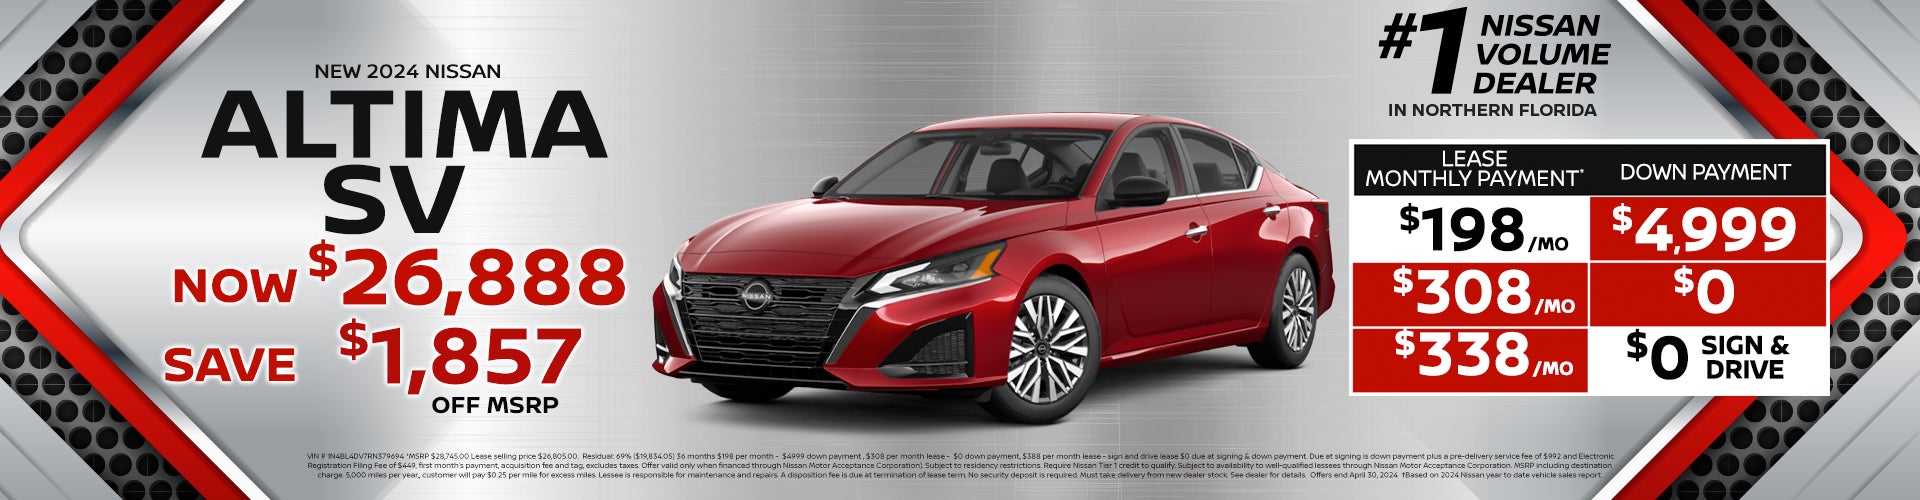 2024 Altima Lease for as low as $198 per month